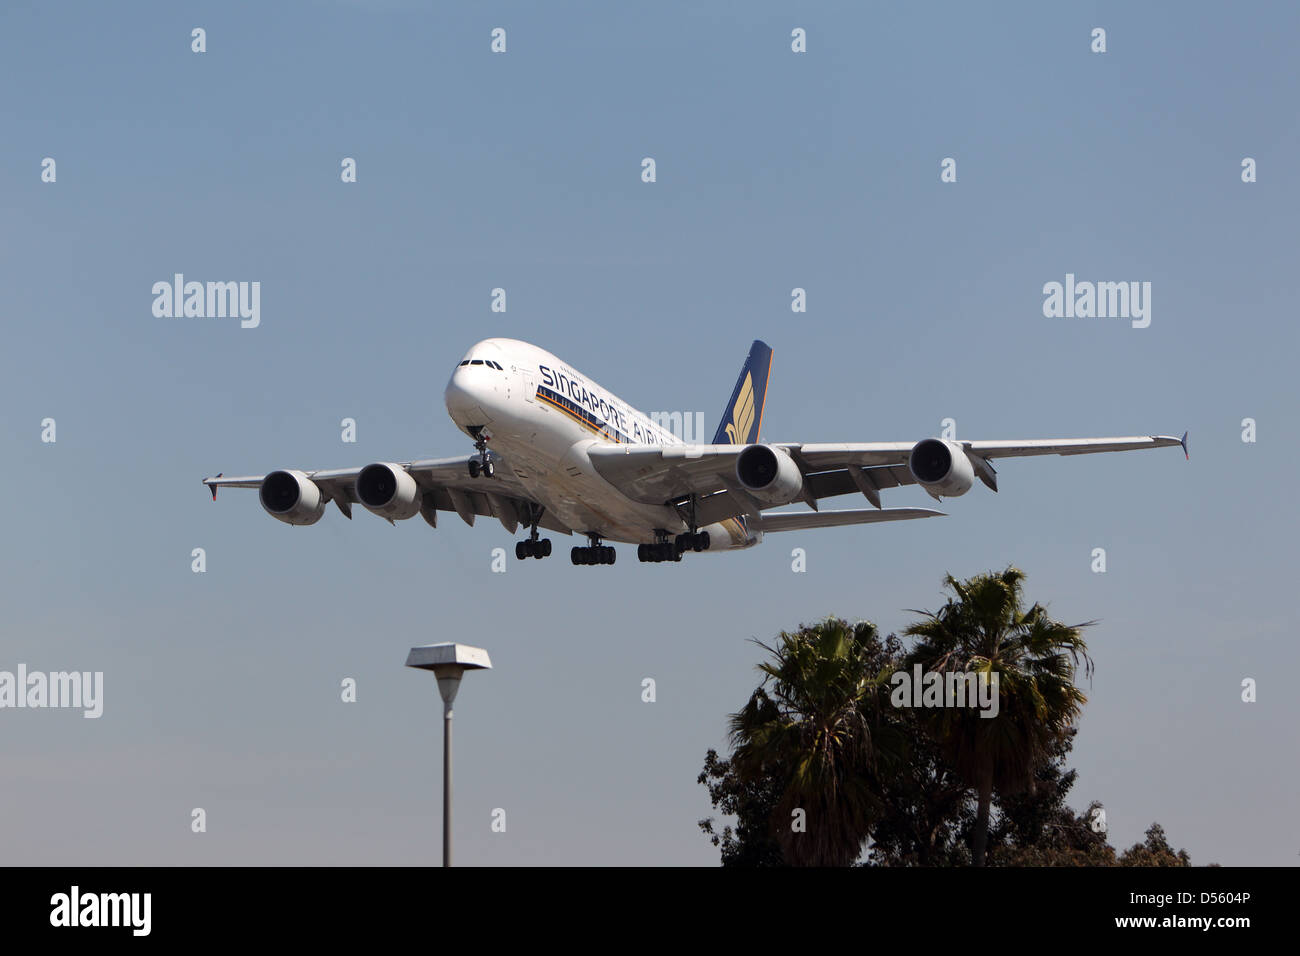 LOS ANGELES, CALIFORNIA, USA - MARCH 21, 2013 - Singapore Airlines Airbus A380-841 lands at Los Angeles Airport Stock Photo